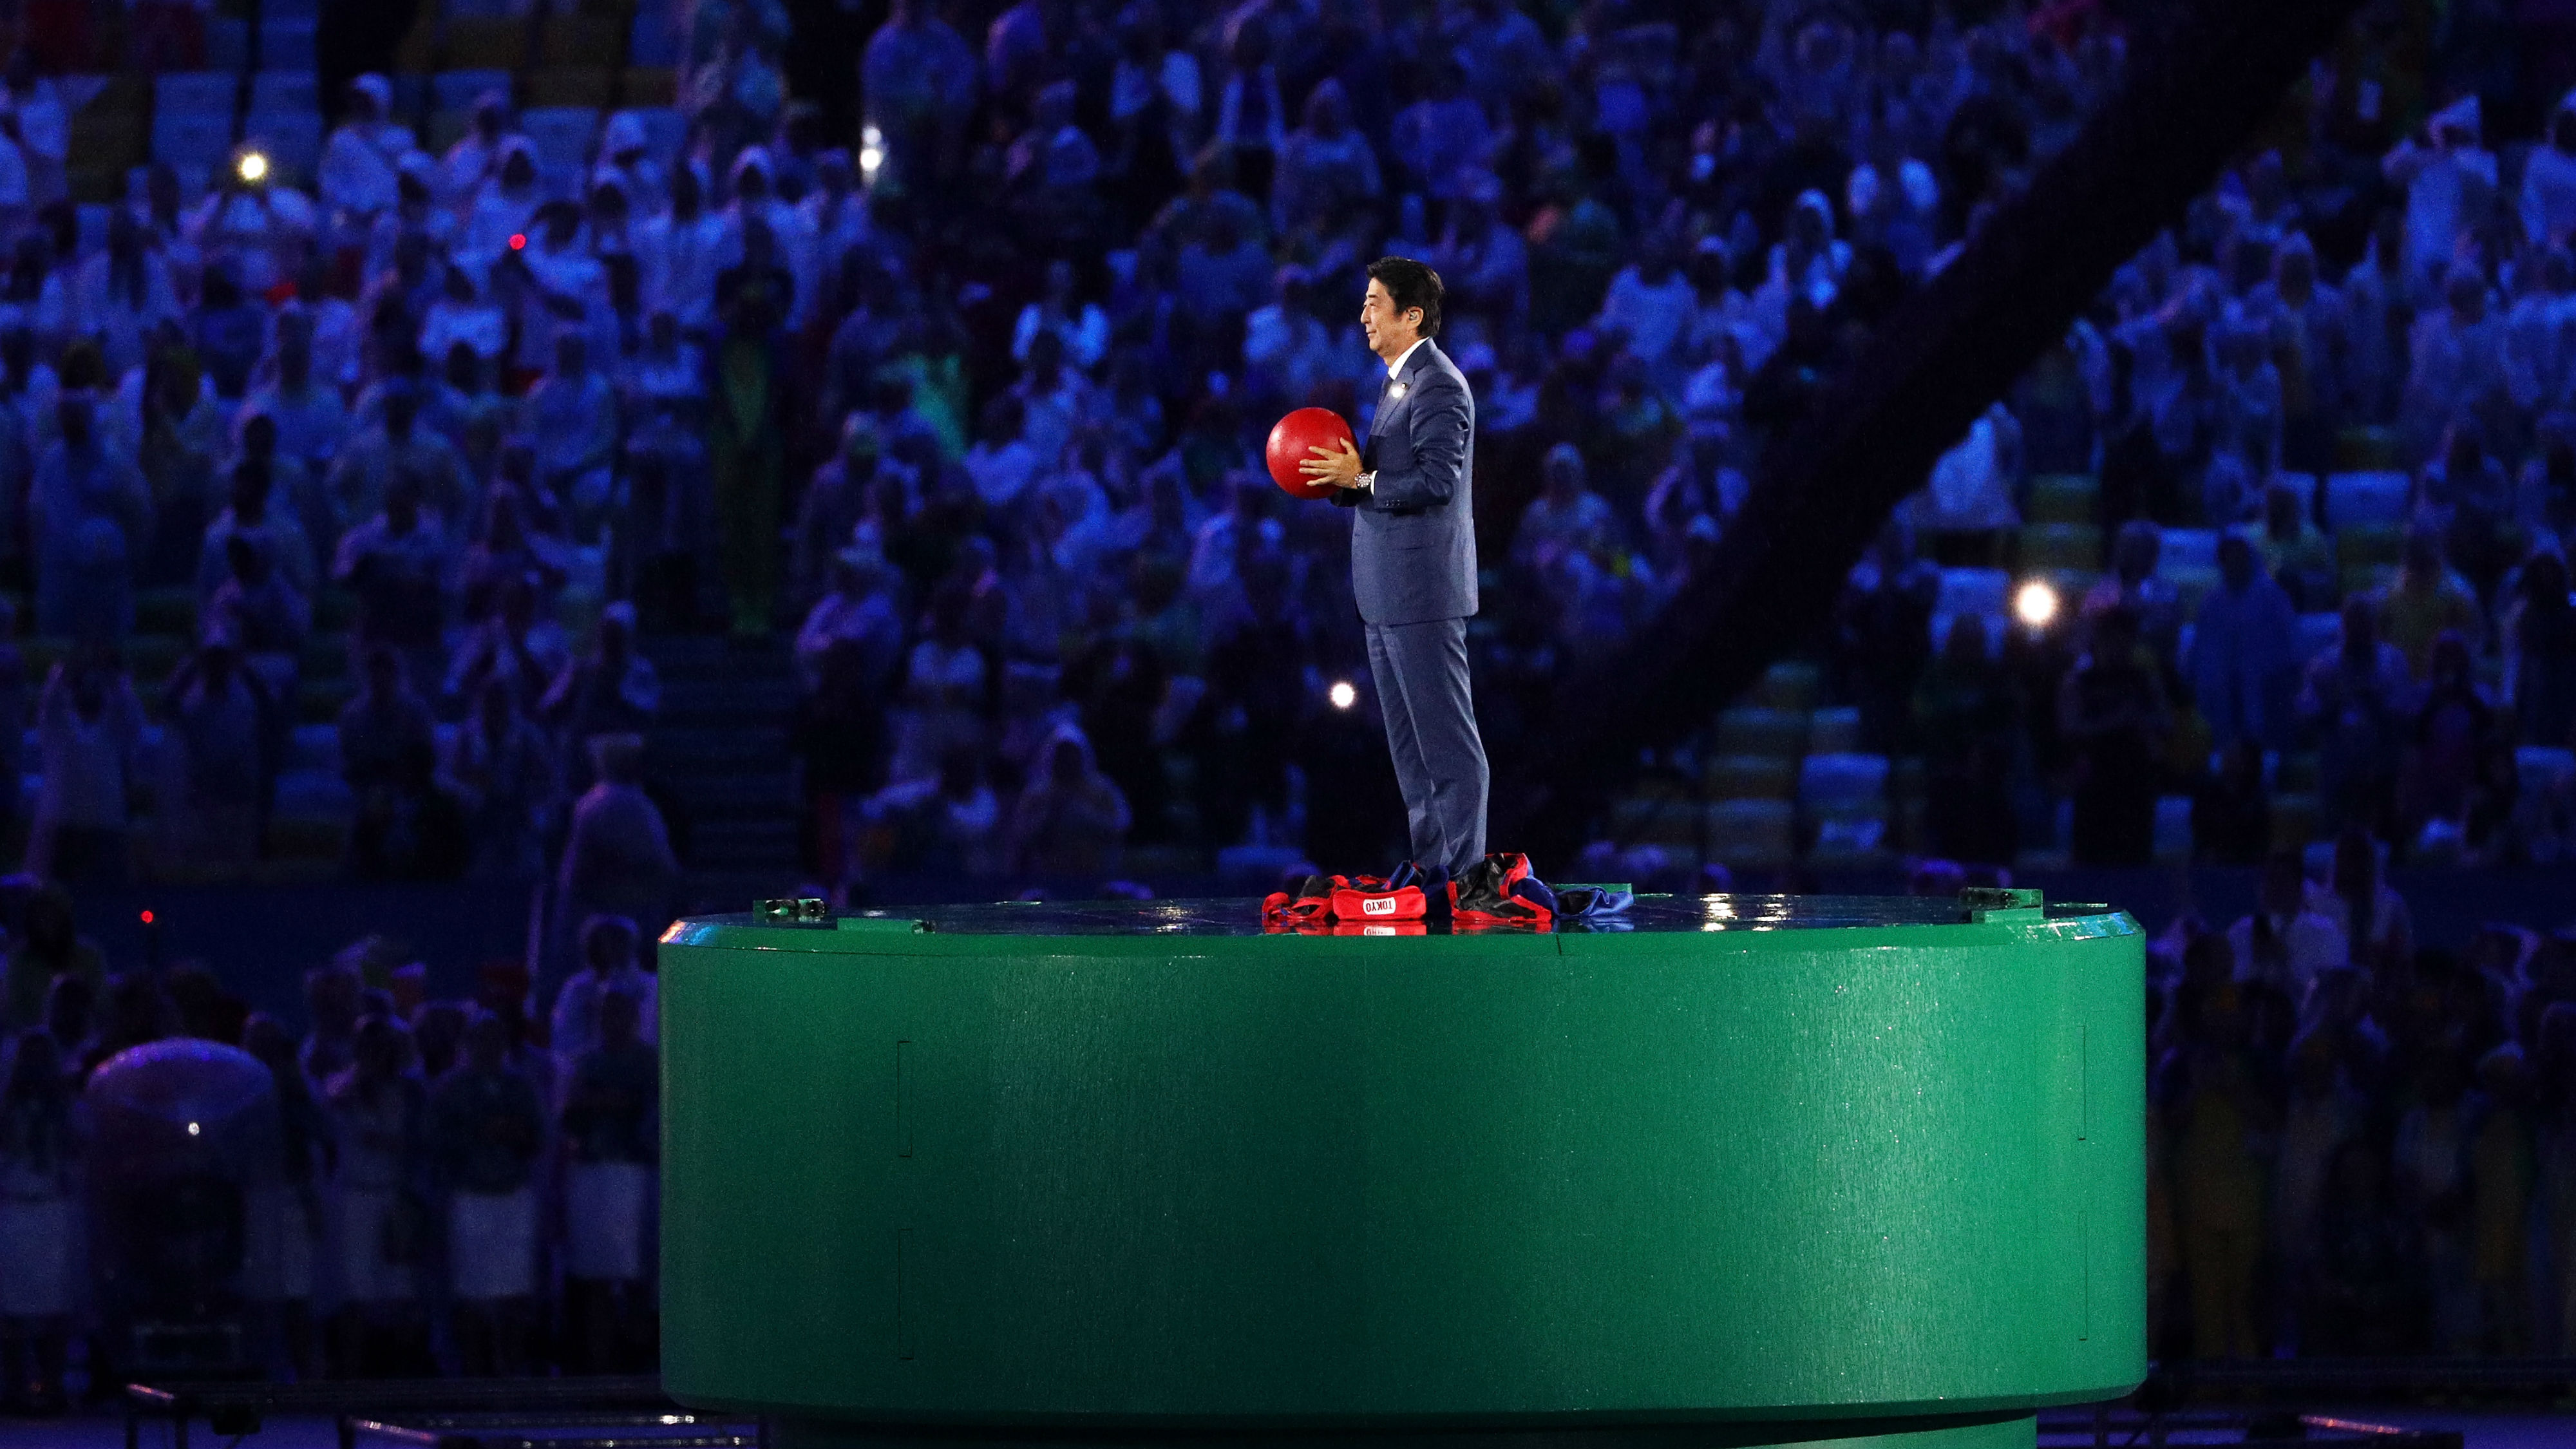 Japanese Prime Minister Shinzo Abe appears in Rio as the Olympic baton is passed on for 2020 